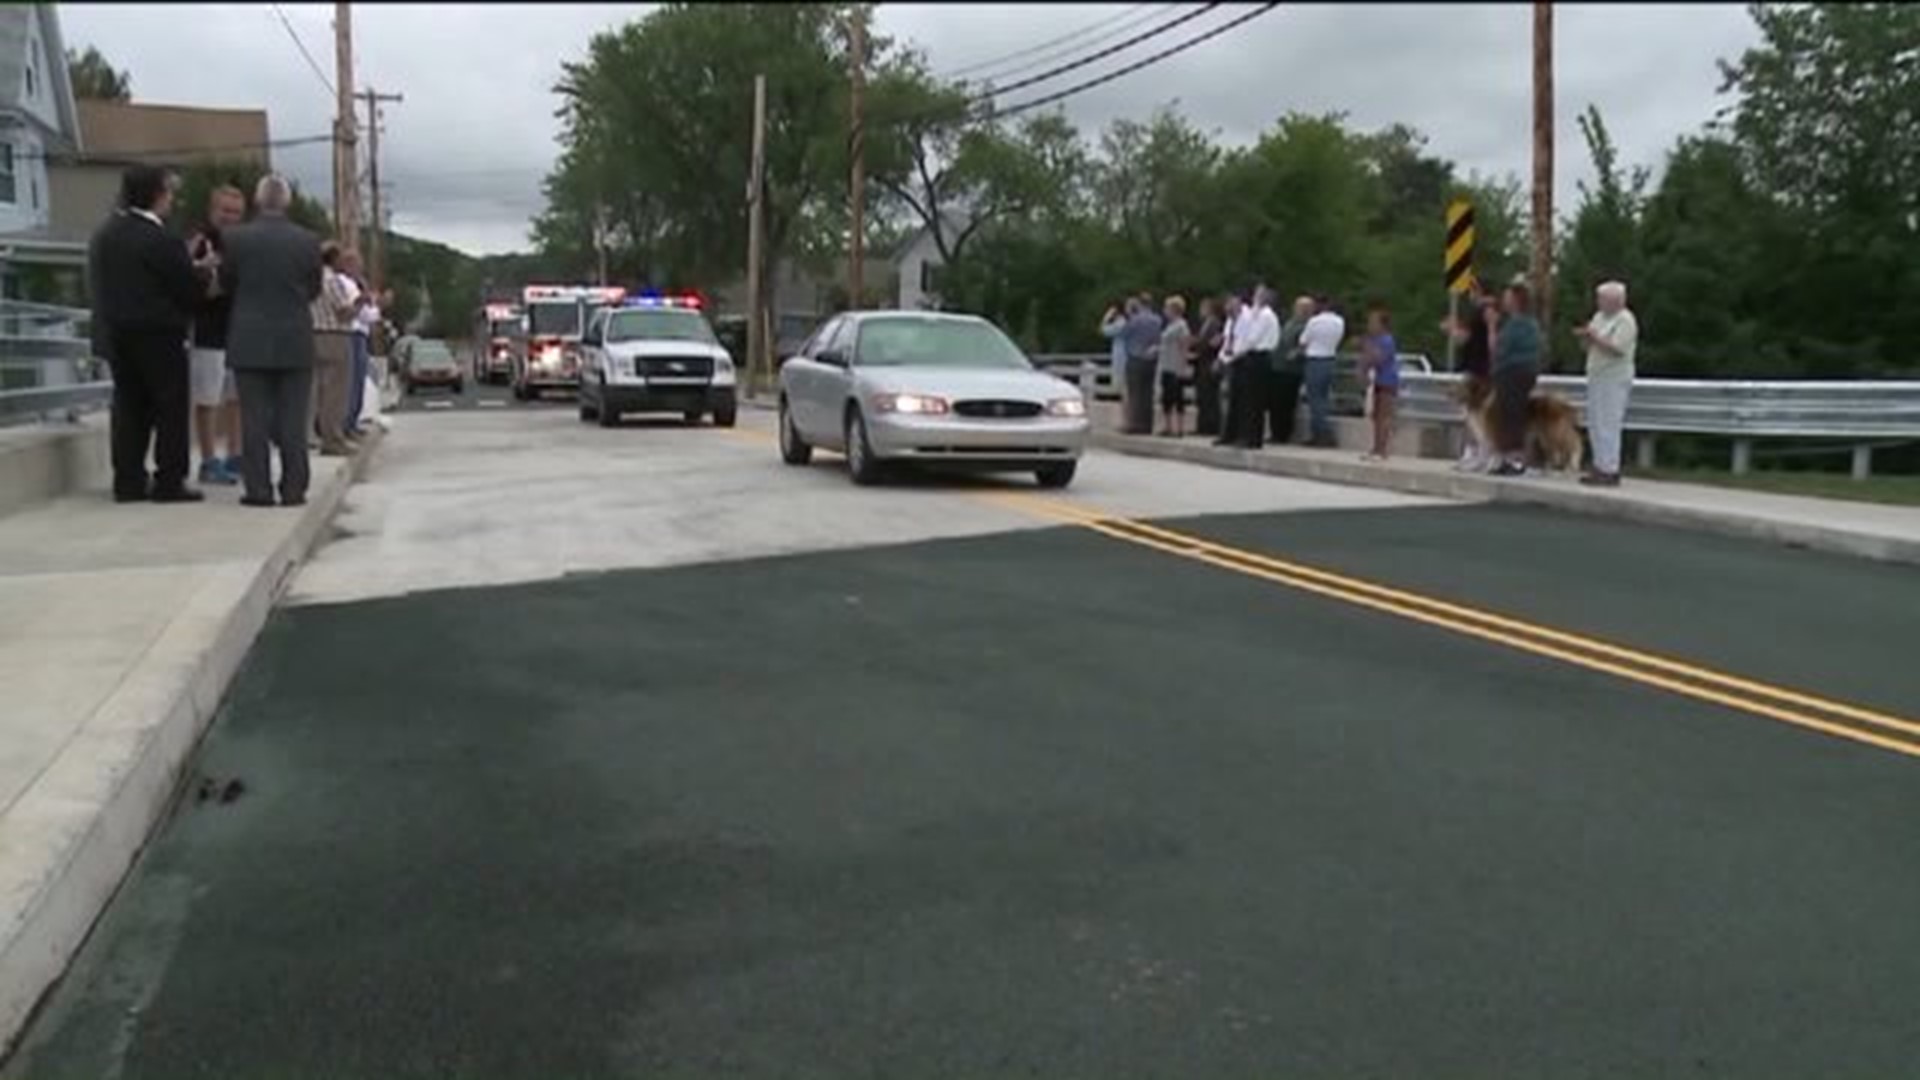 Bridge Reopens after Years of Being Closed